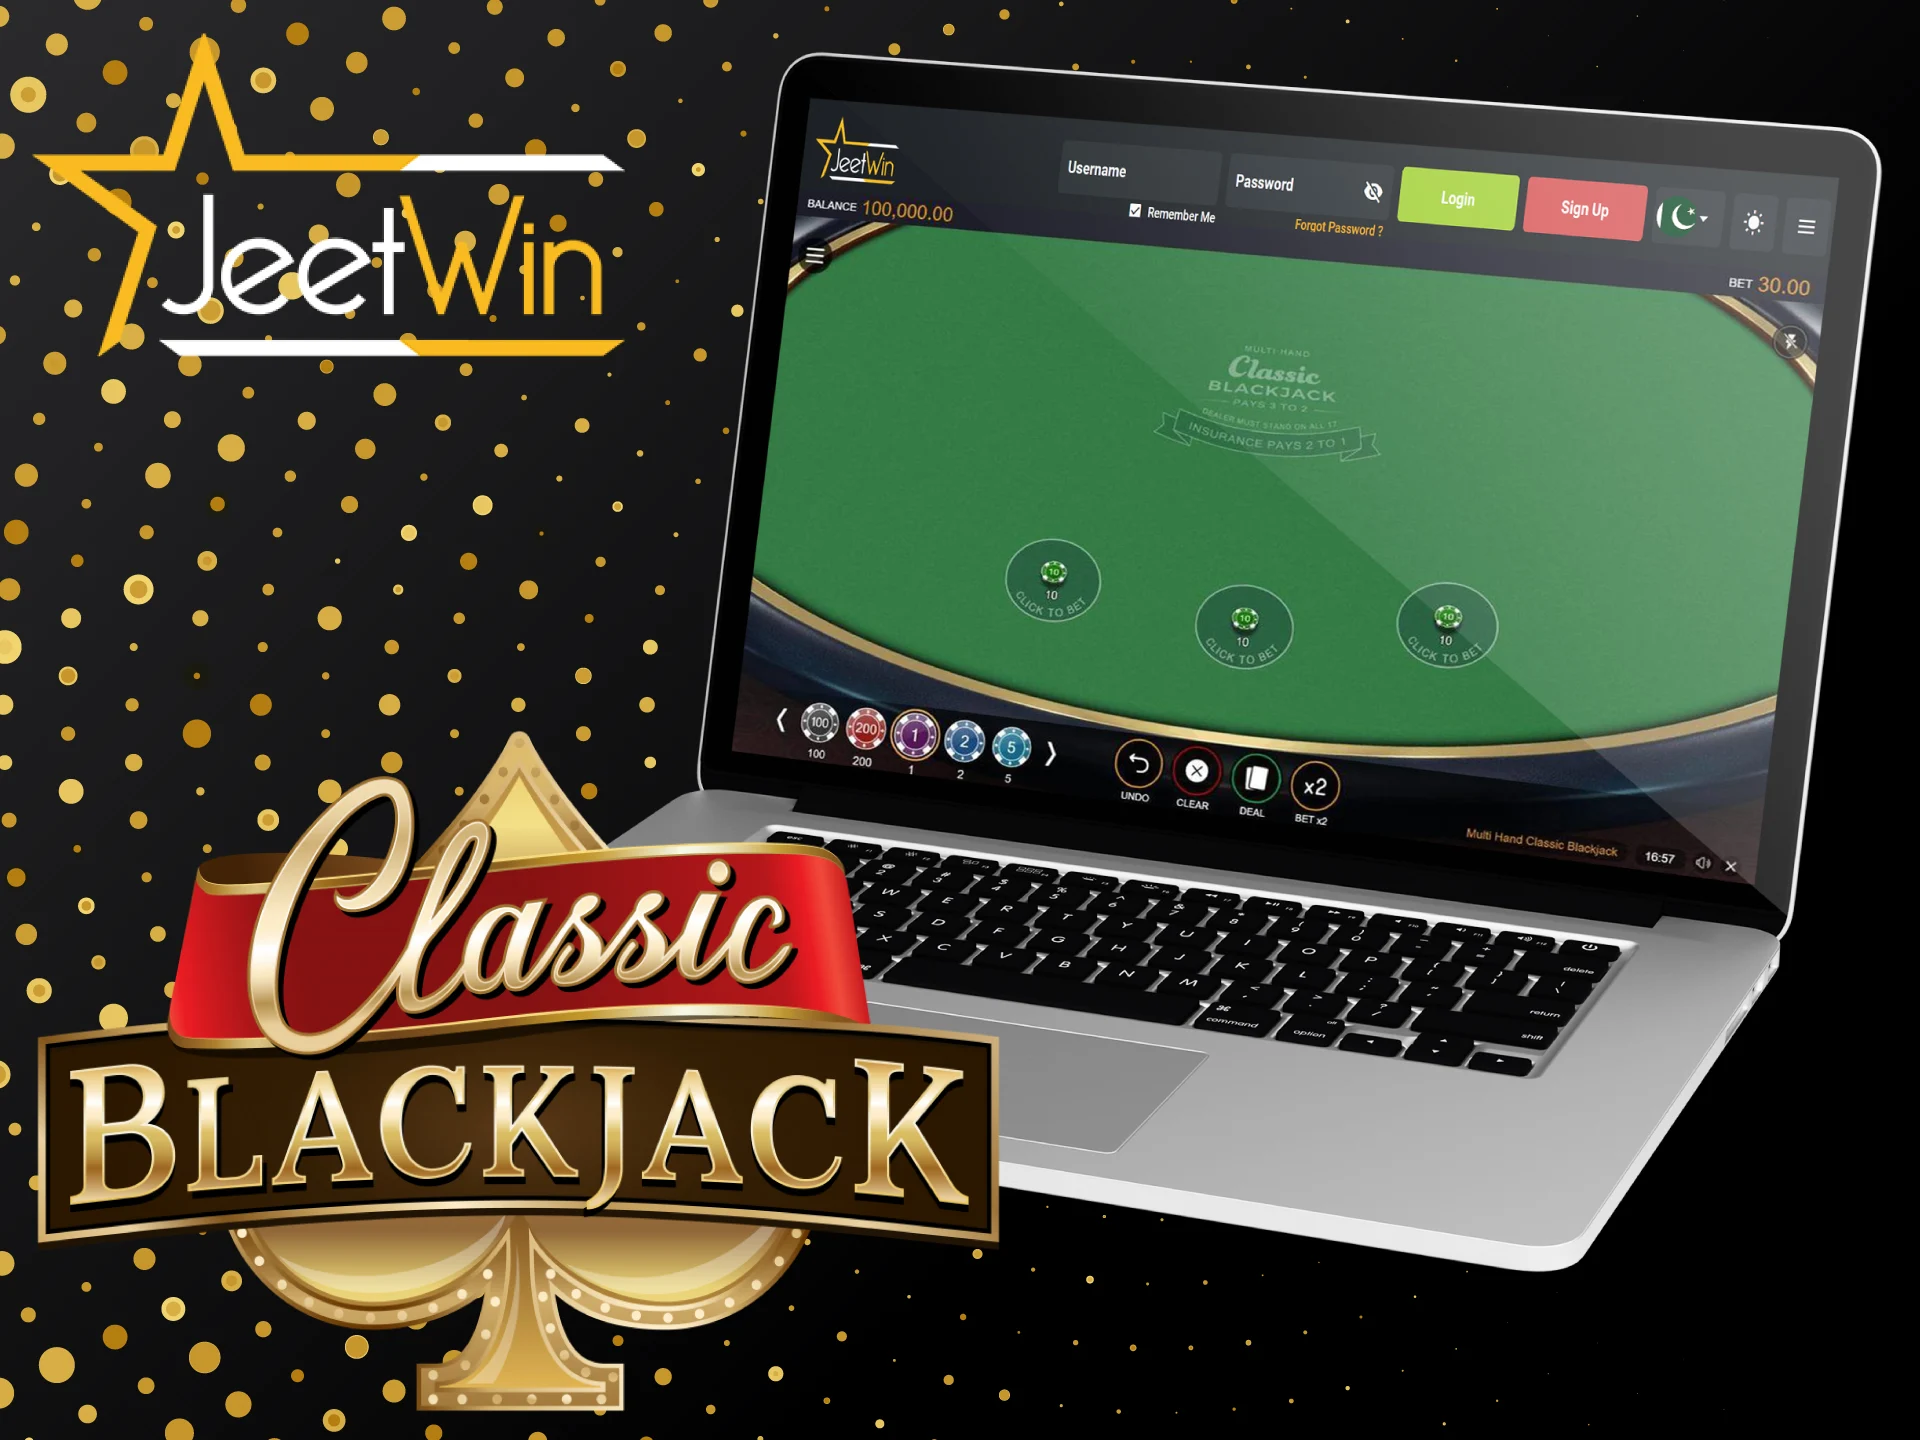 Try your luck with the classic card game of blackjack at JeetWin.